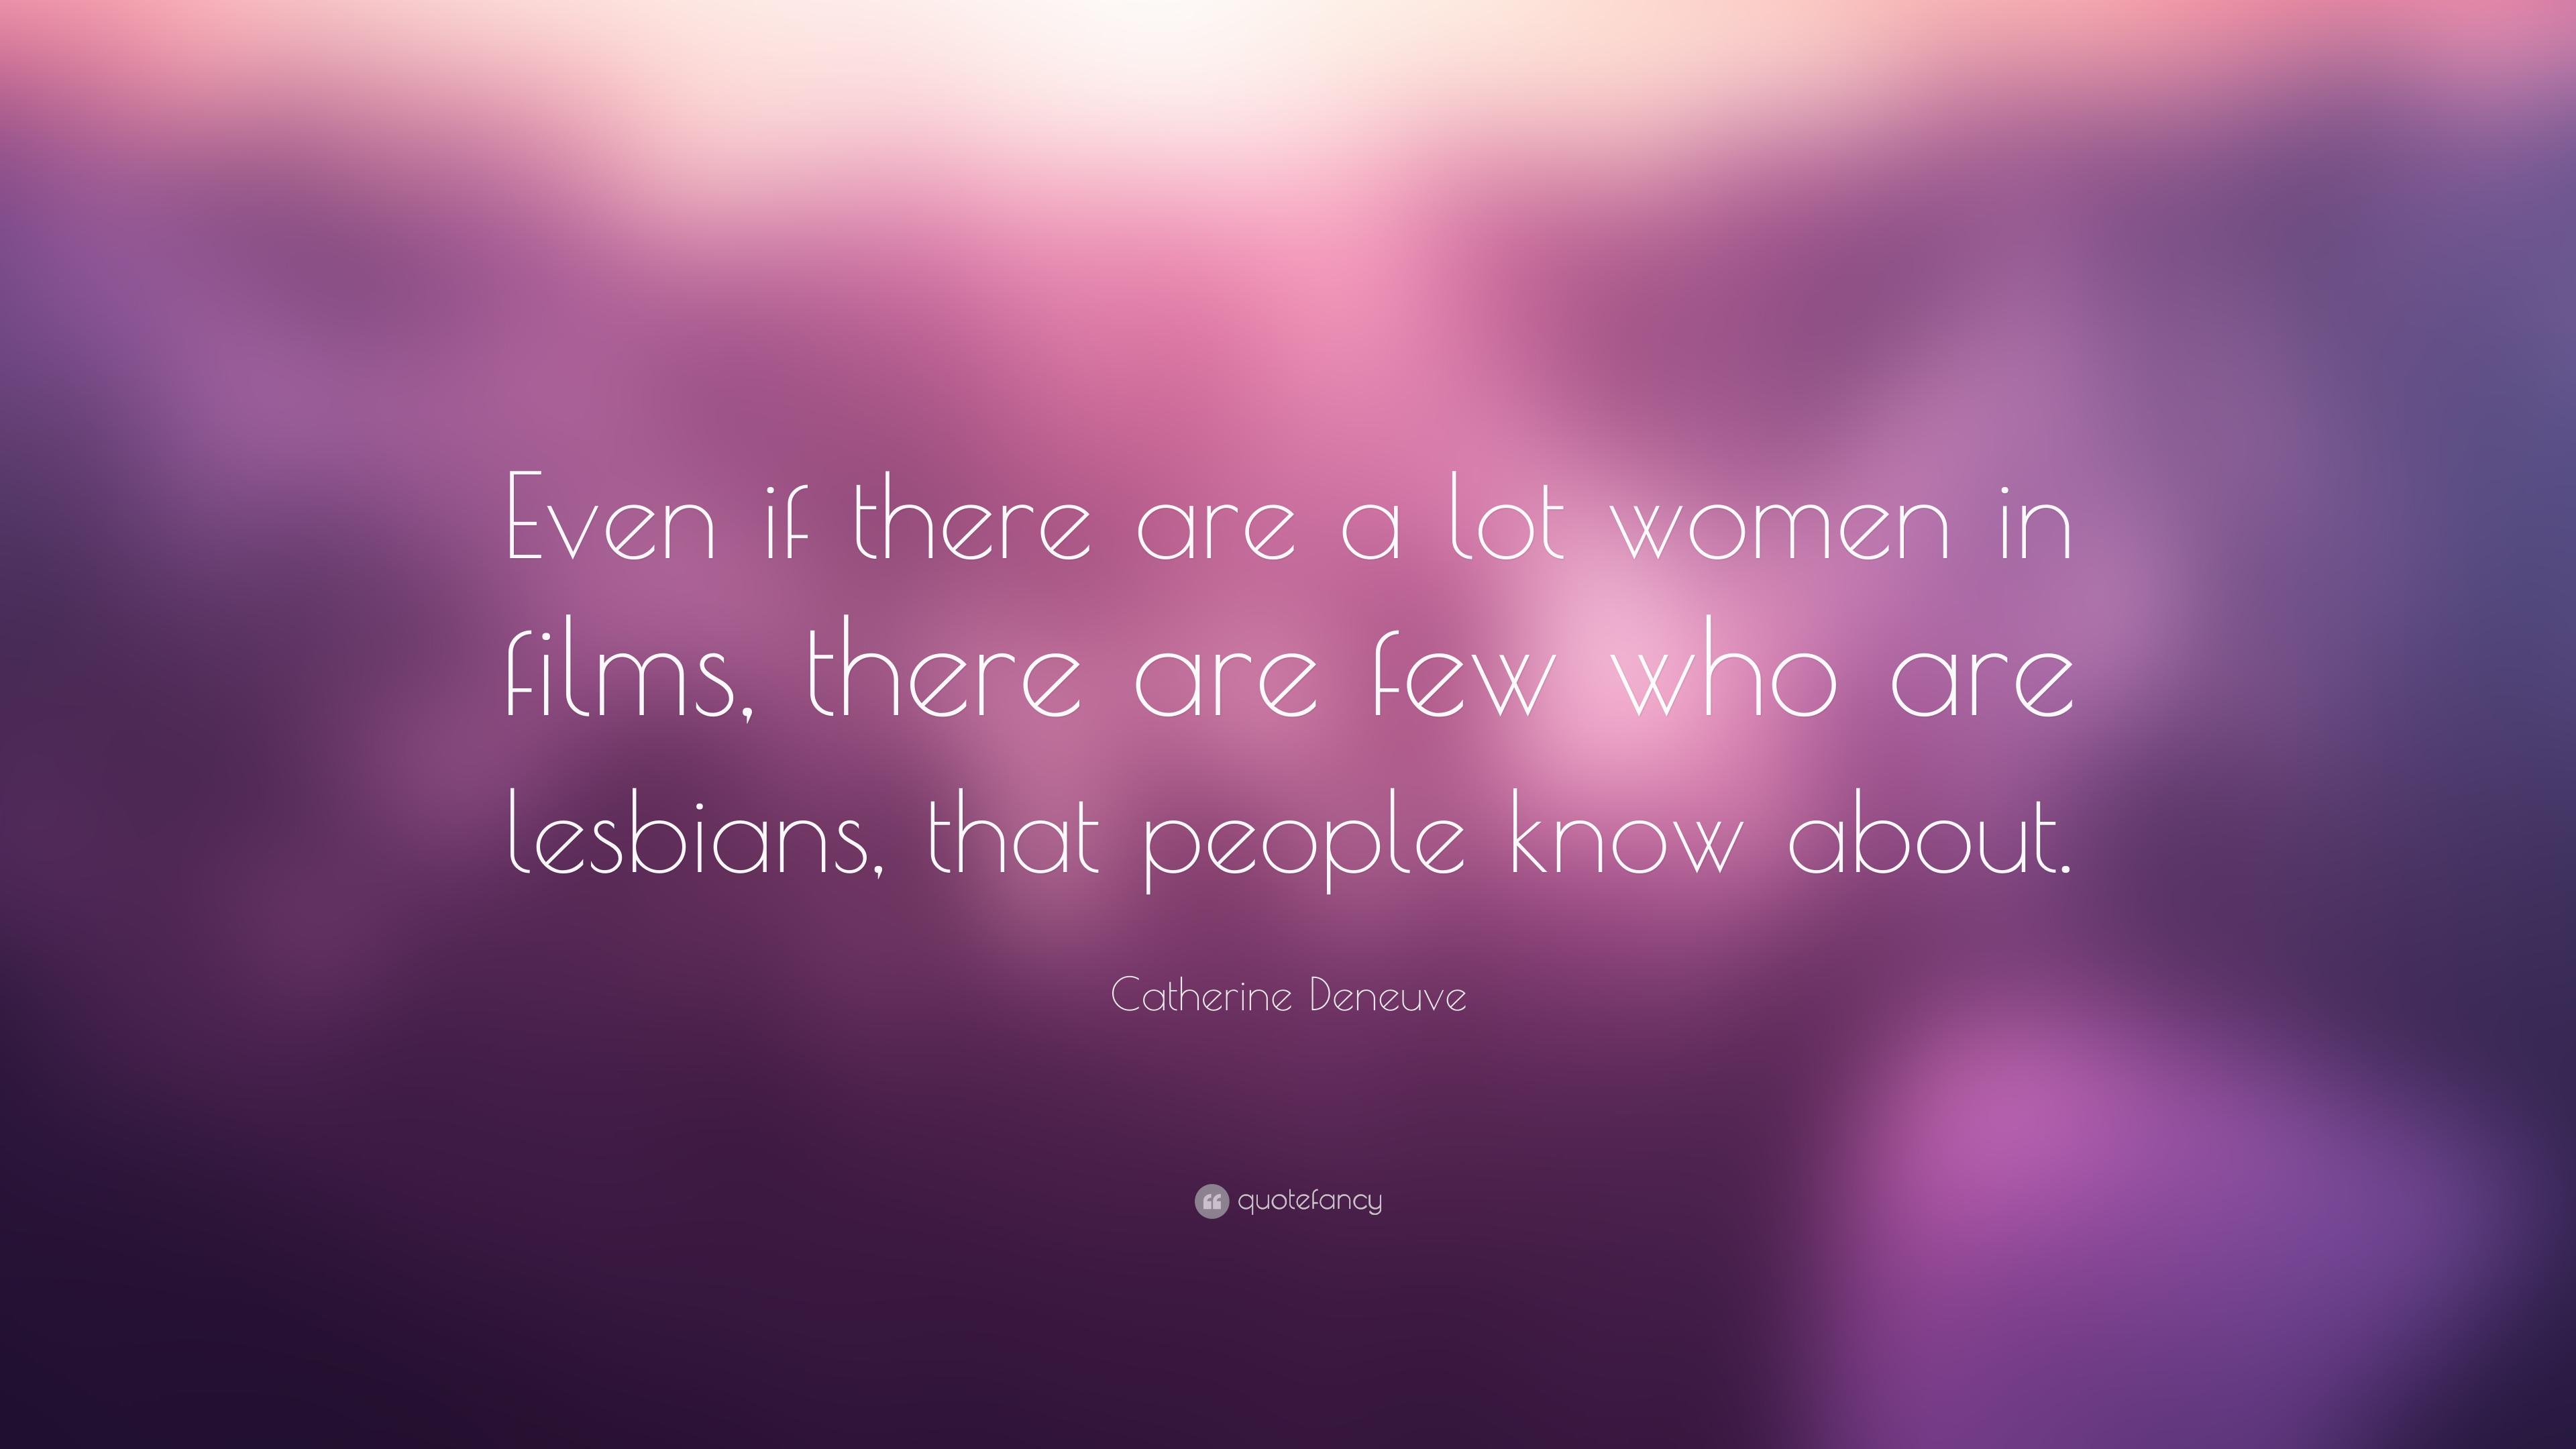 Catherine Deneuve Quote: “Even if there are a lot women in films